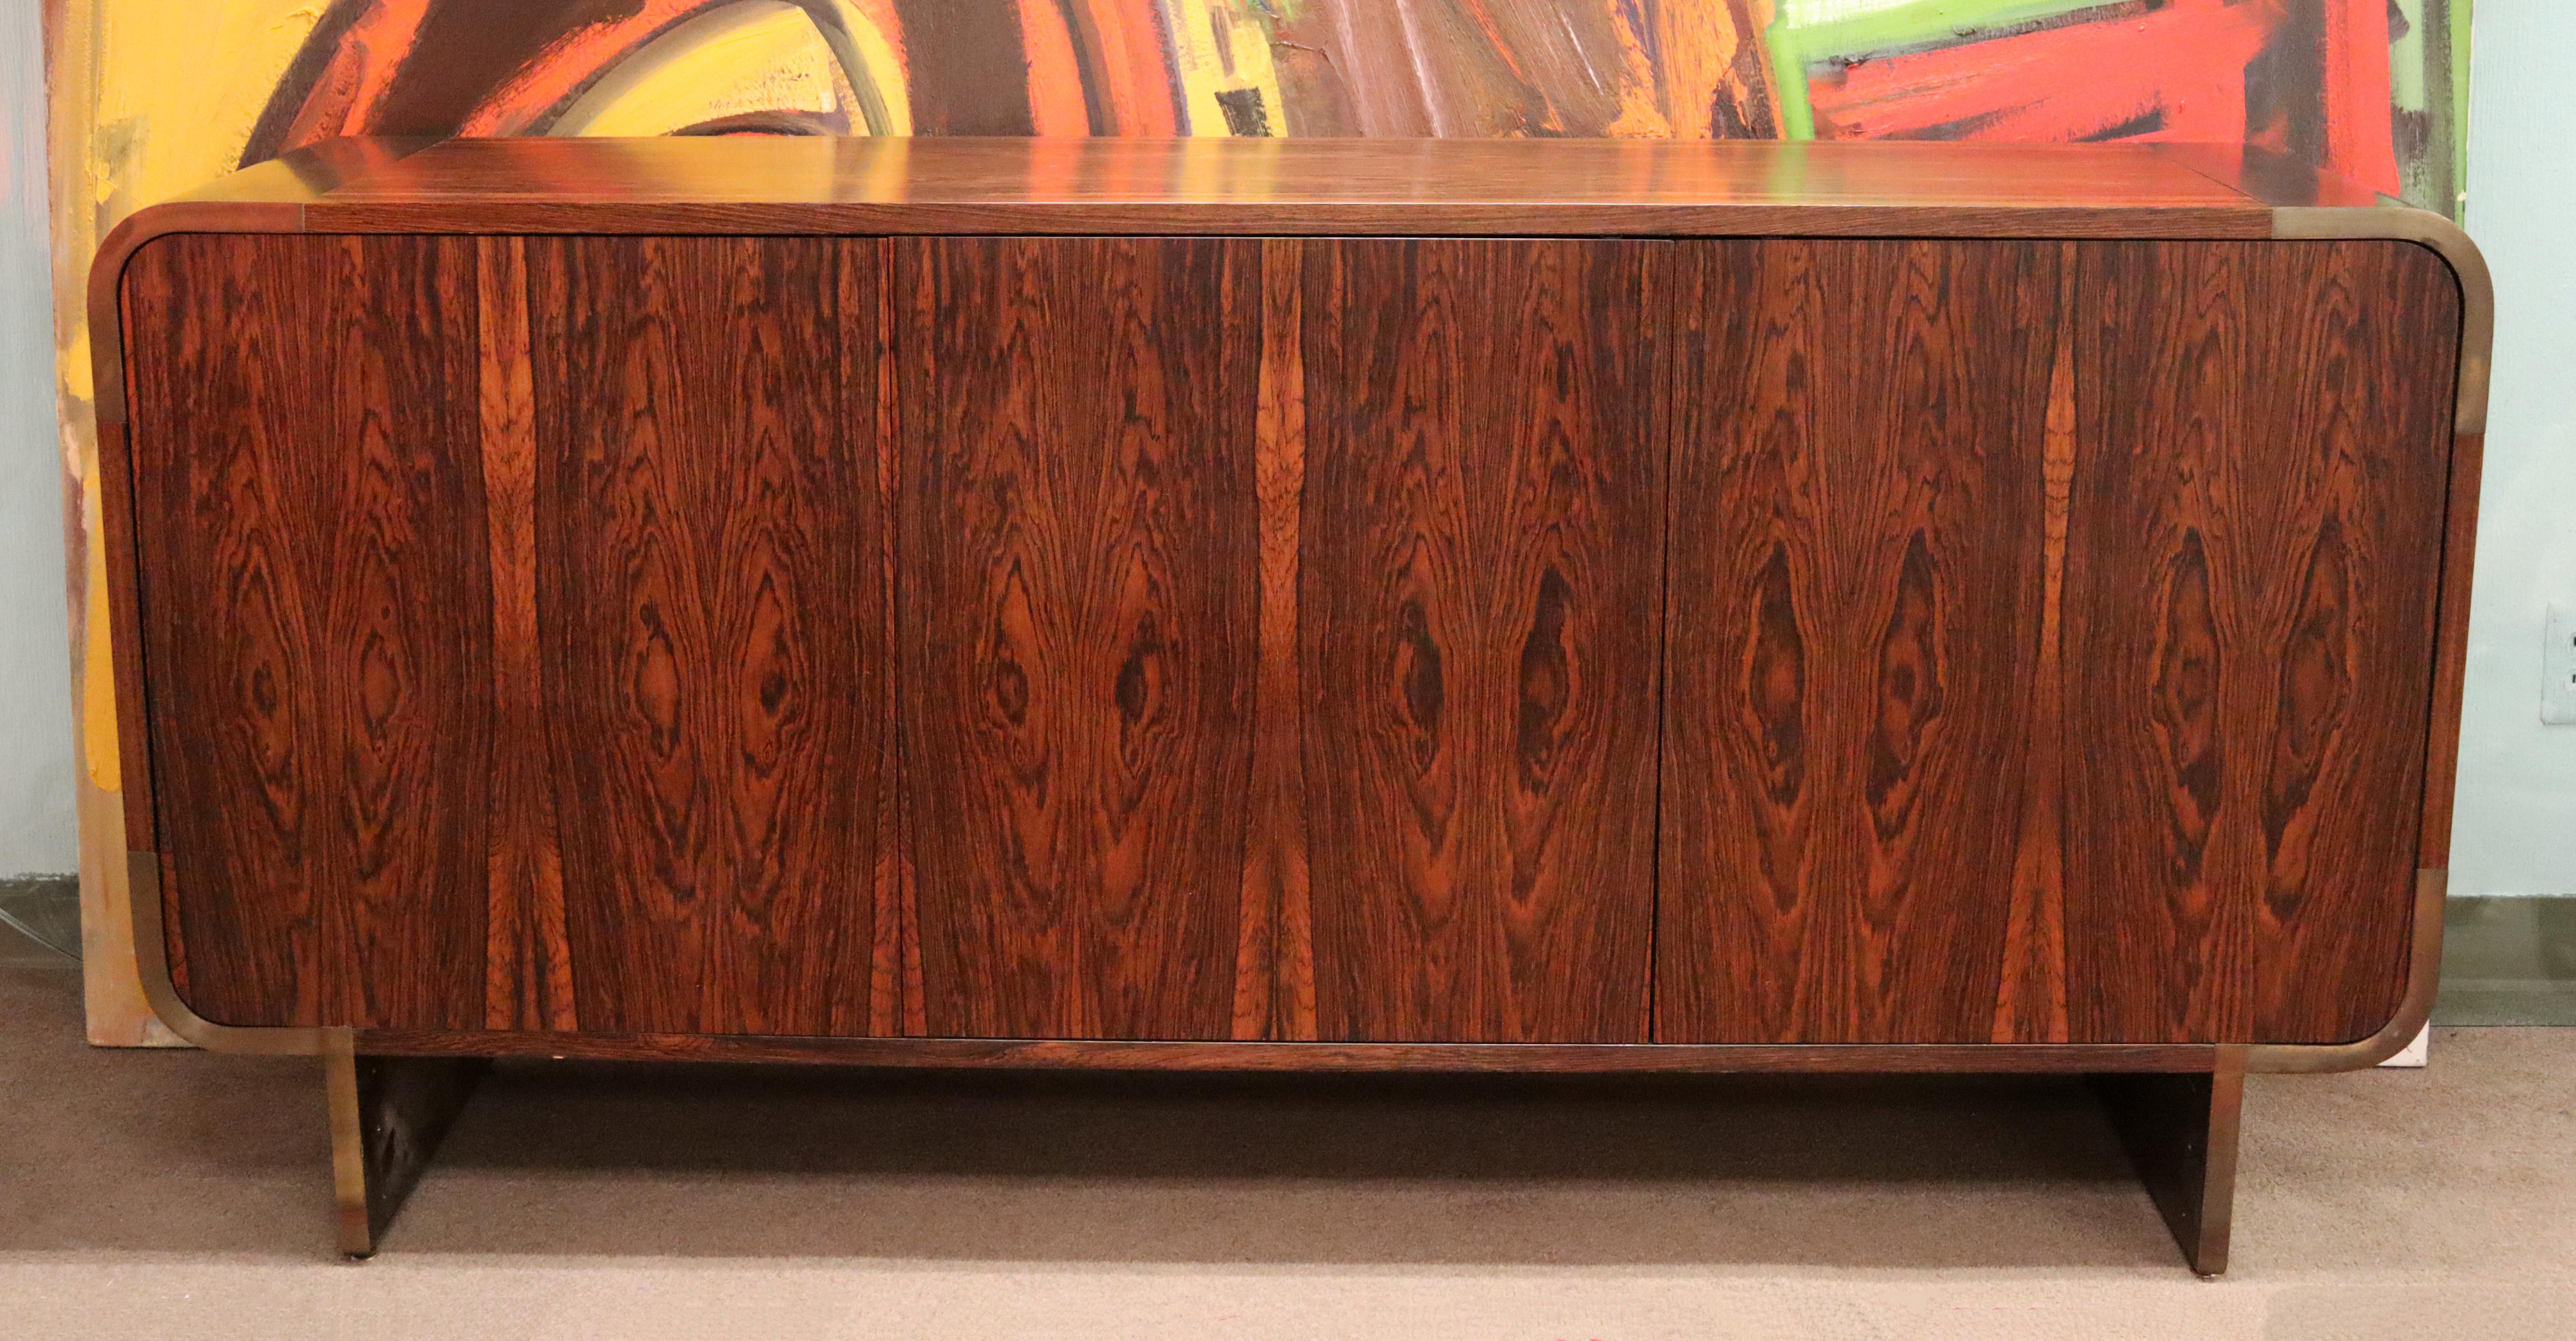 For your consideration is a luxe looking curved rosewood and bronze credenza, custom ordered by Leon Rosen for Pace. The piece is finished on all sides so can also be floating in a room, circa 1970s. In excellent vintage condition. The dimensions of